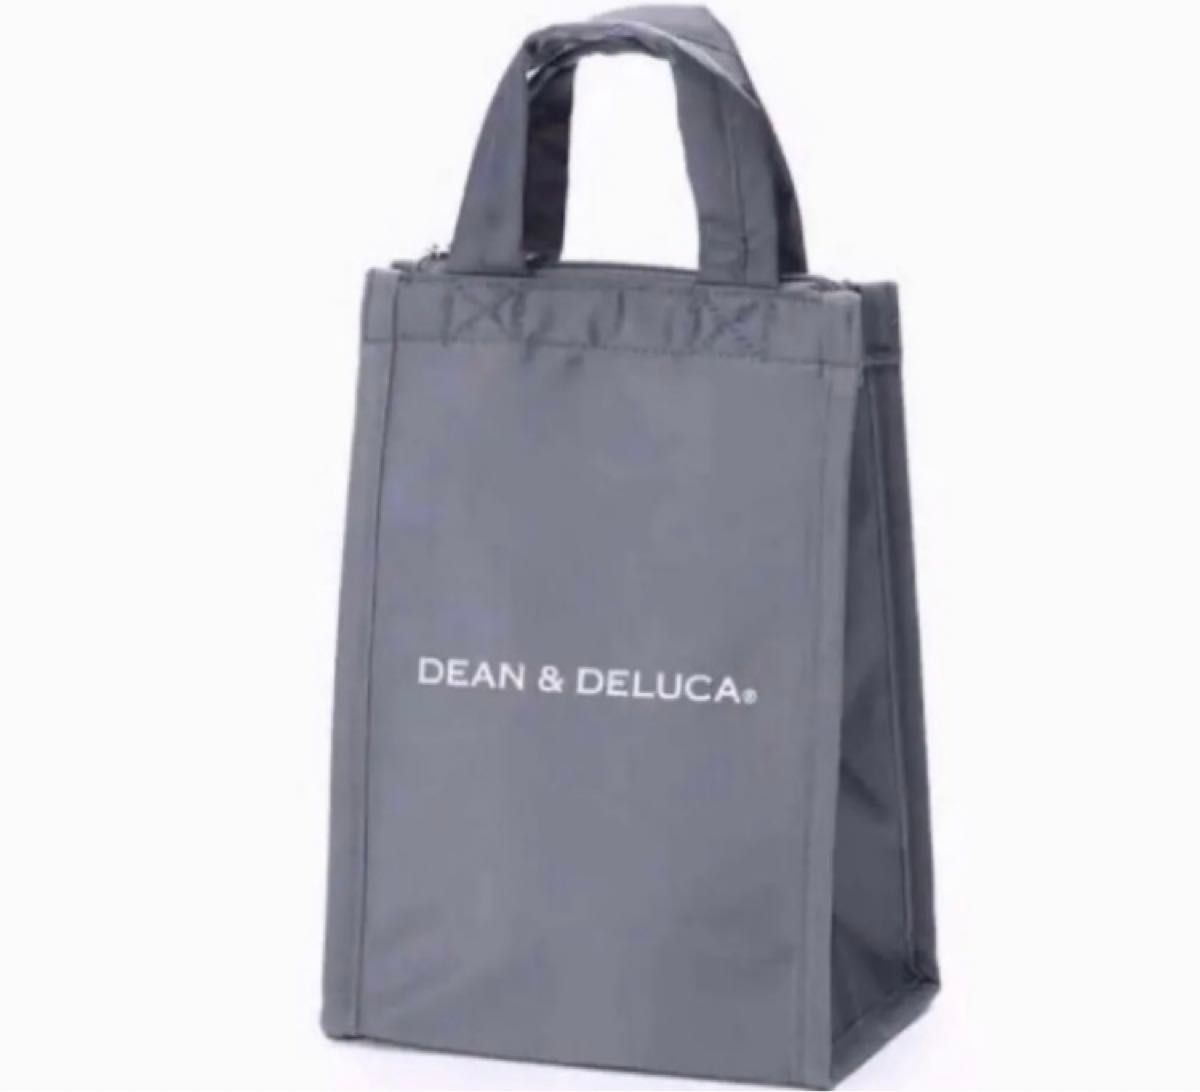 DEAN DELUCA 正規品　ディーン＆デルーカ S 保冷バッグ グレー　クーラーバッグ ランチバッグ 弁当用品　オンライン限定